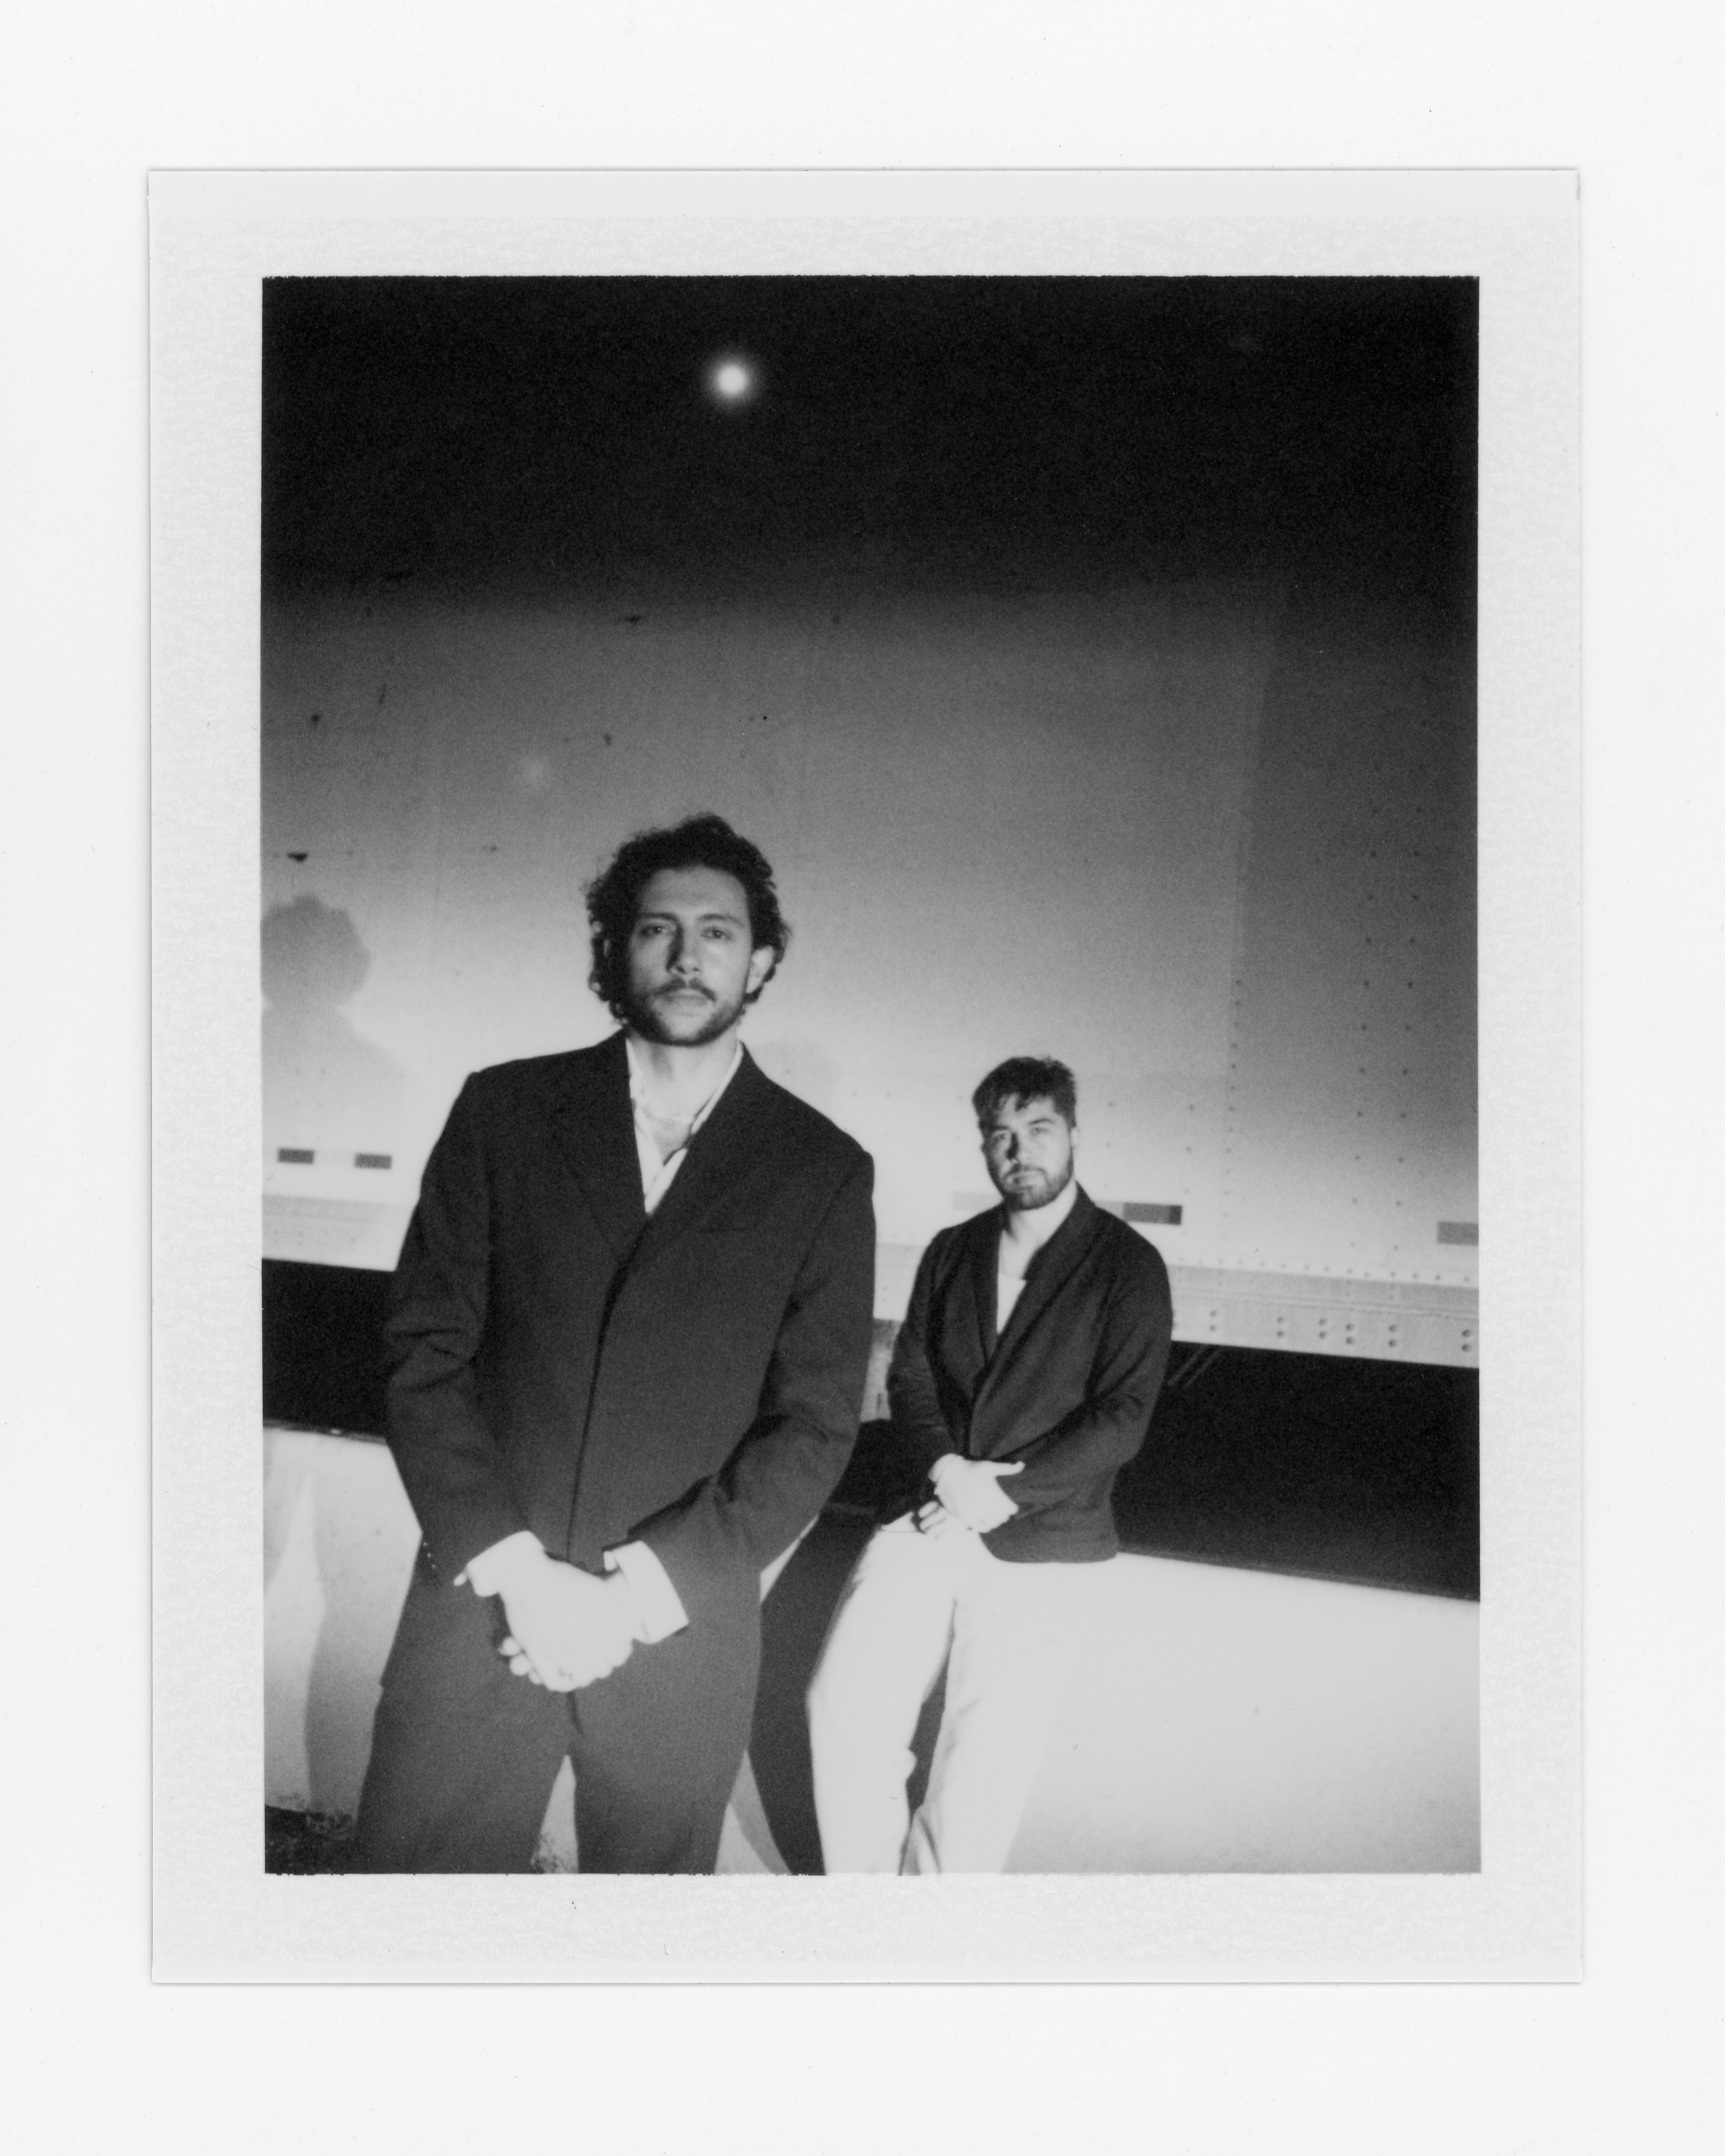 Image used with permission from Ticketmaster | Majid Jordan tickets